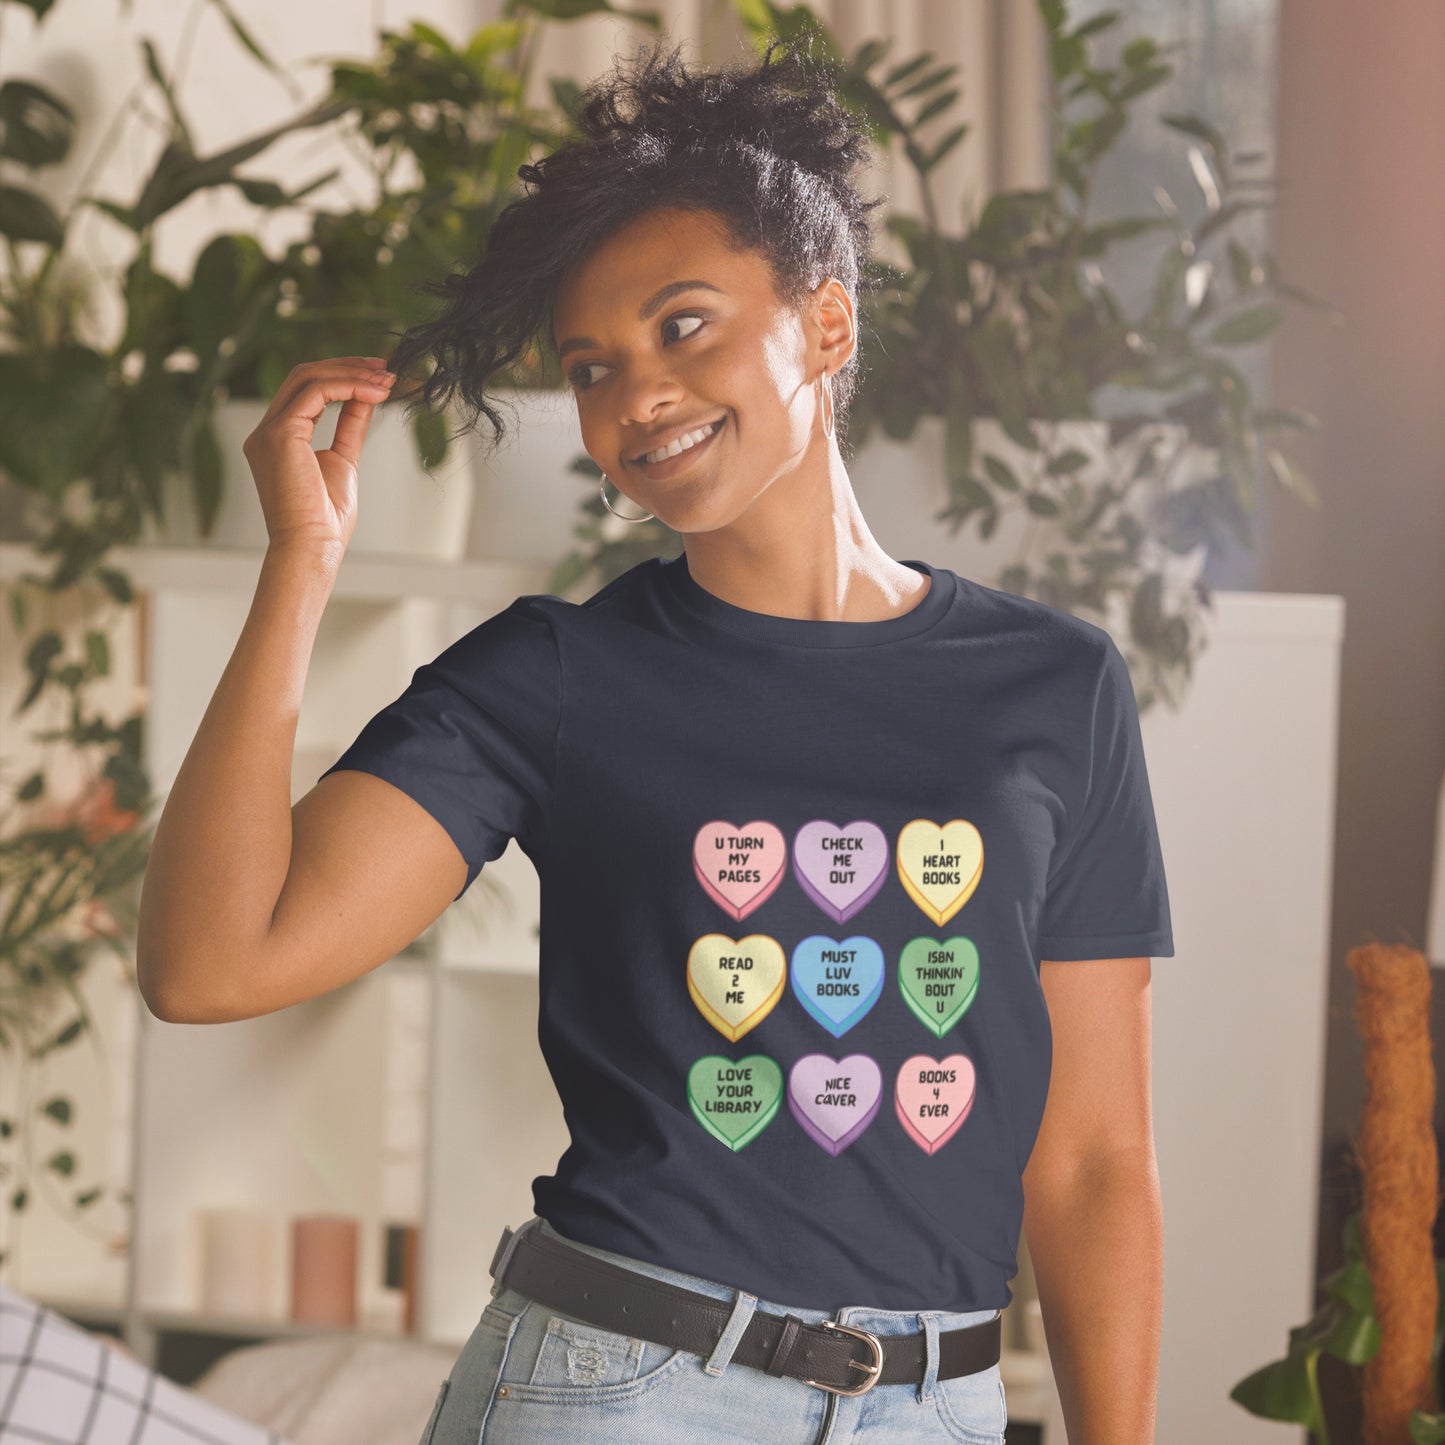 Candy Hearts Short-Sleeve Unisex T-Shirt - The Spinster Librarian Shop